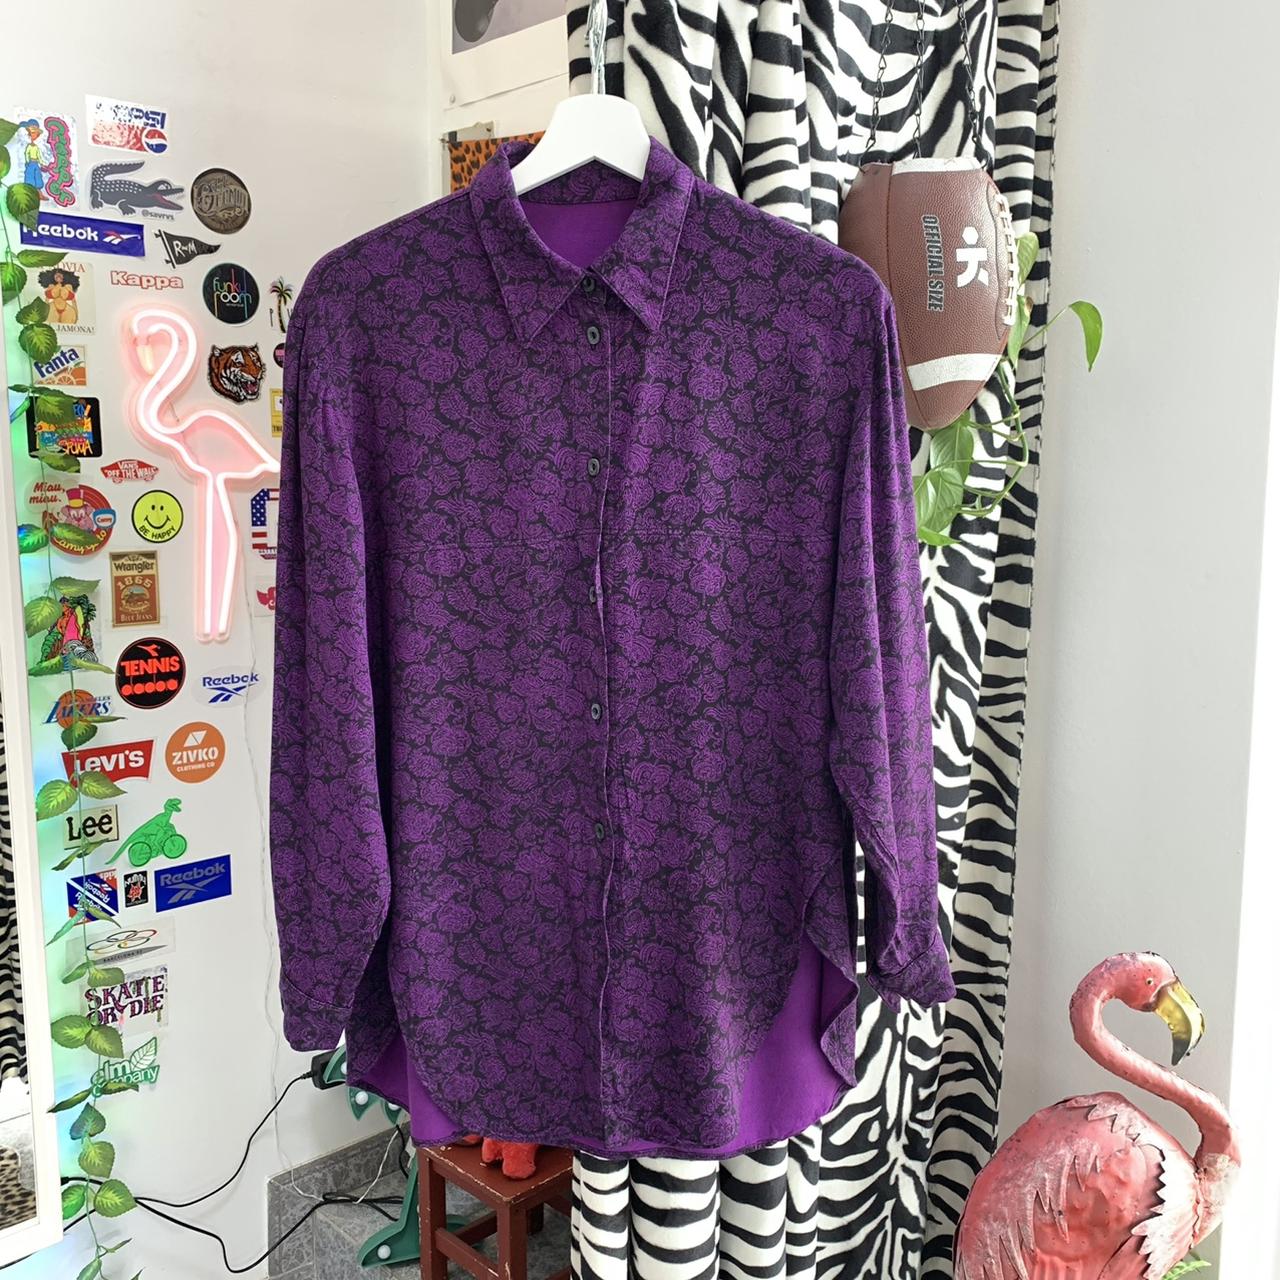 Product Image 1 - Camisa Witch
Talla: S chico /